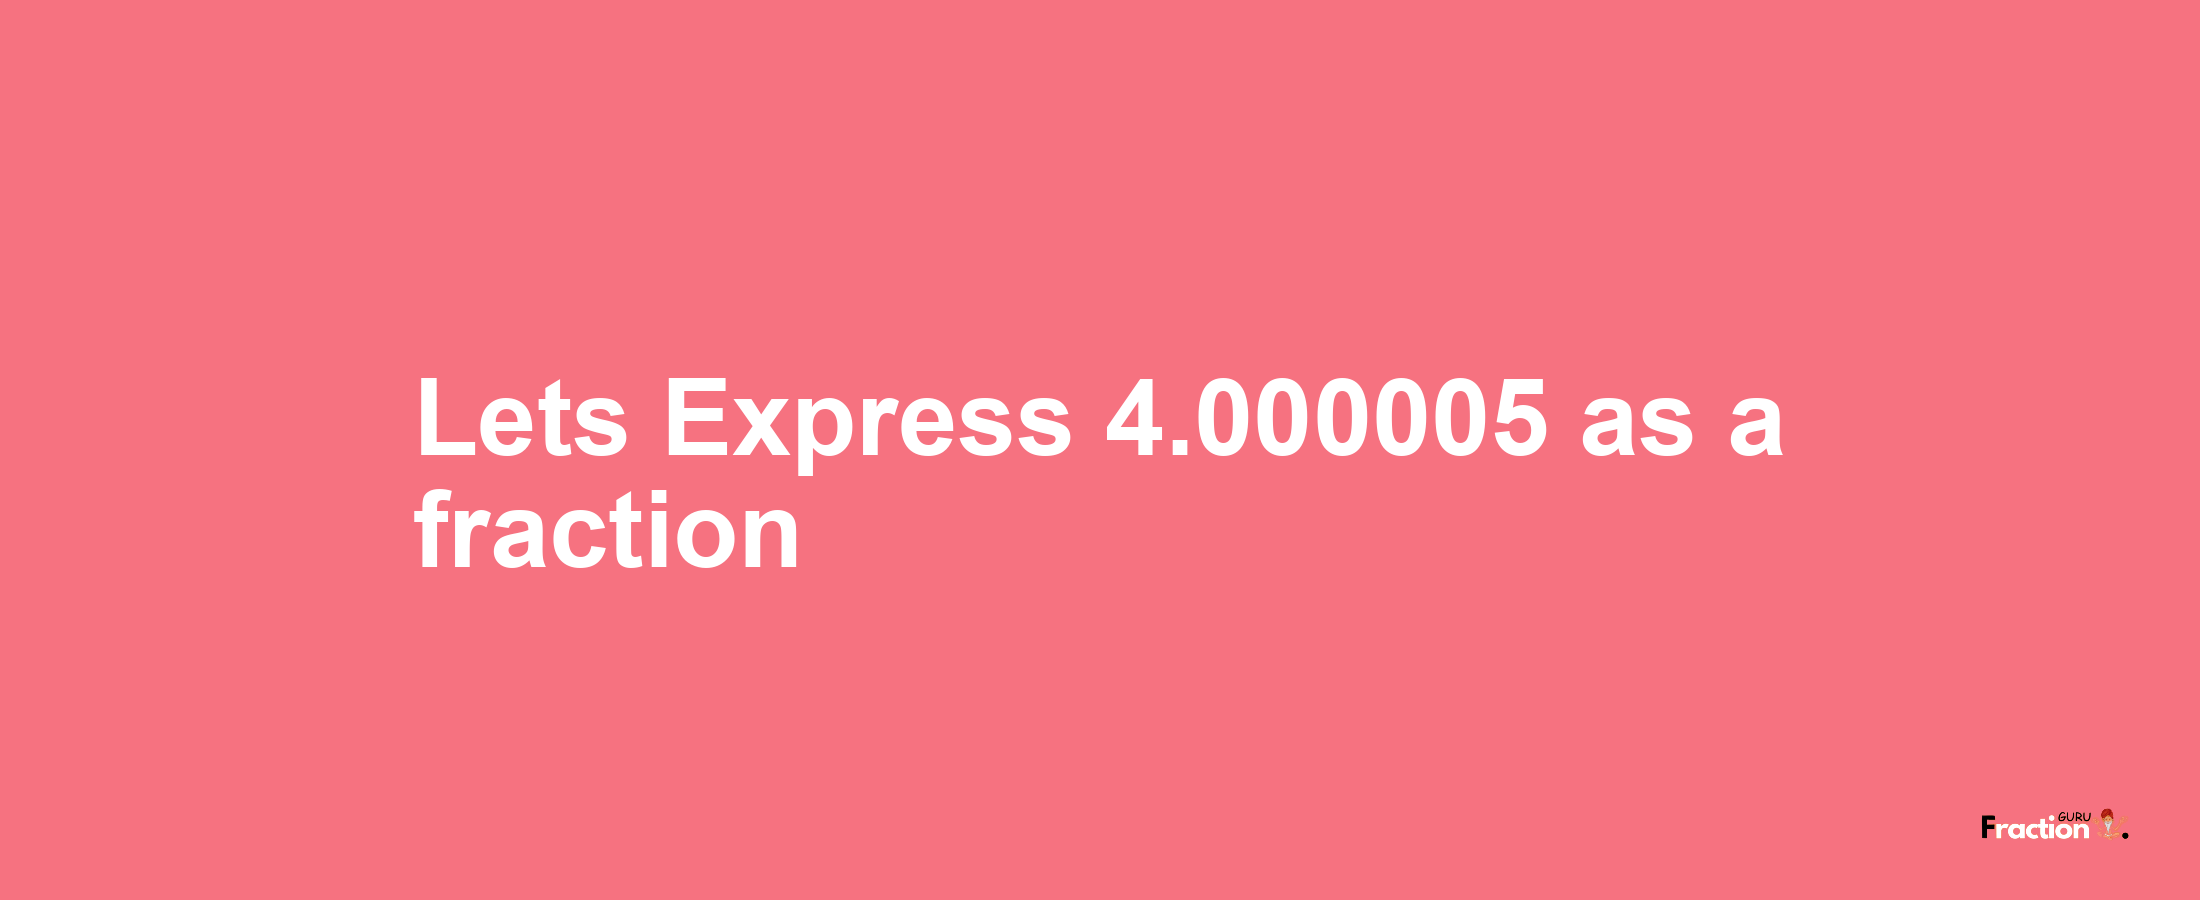 Lets Express 4.000005 as afraction